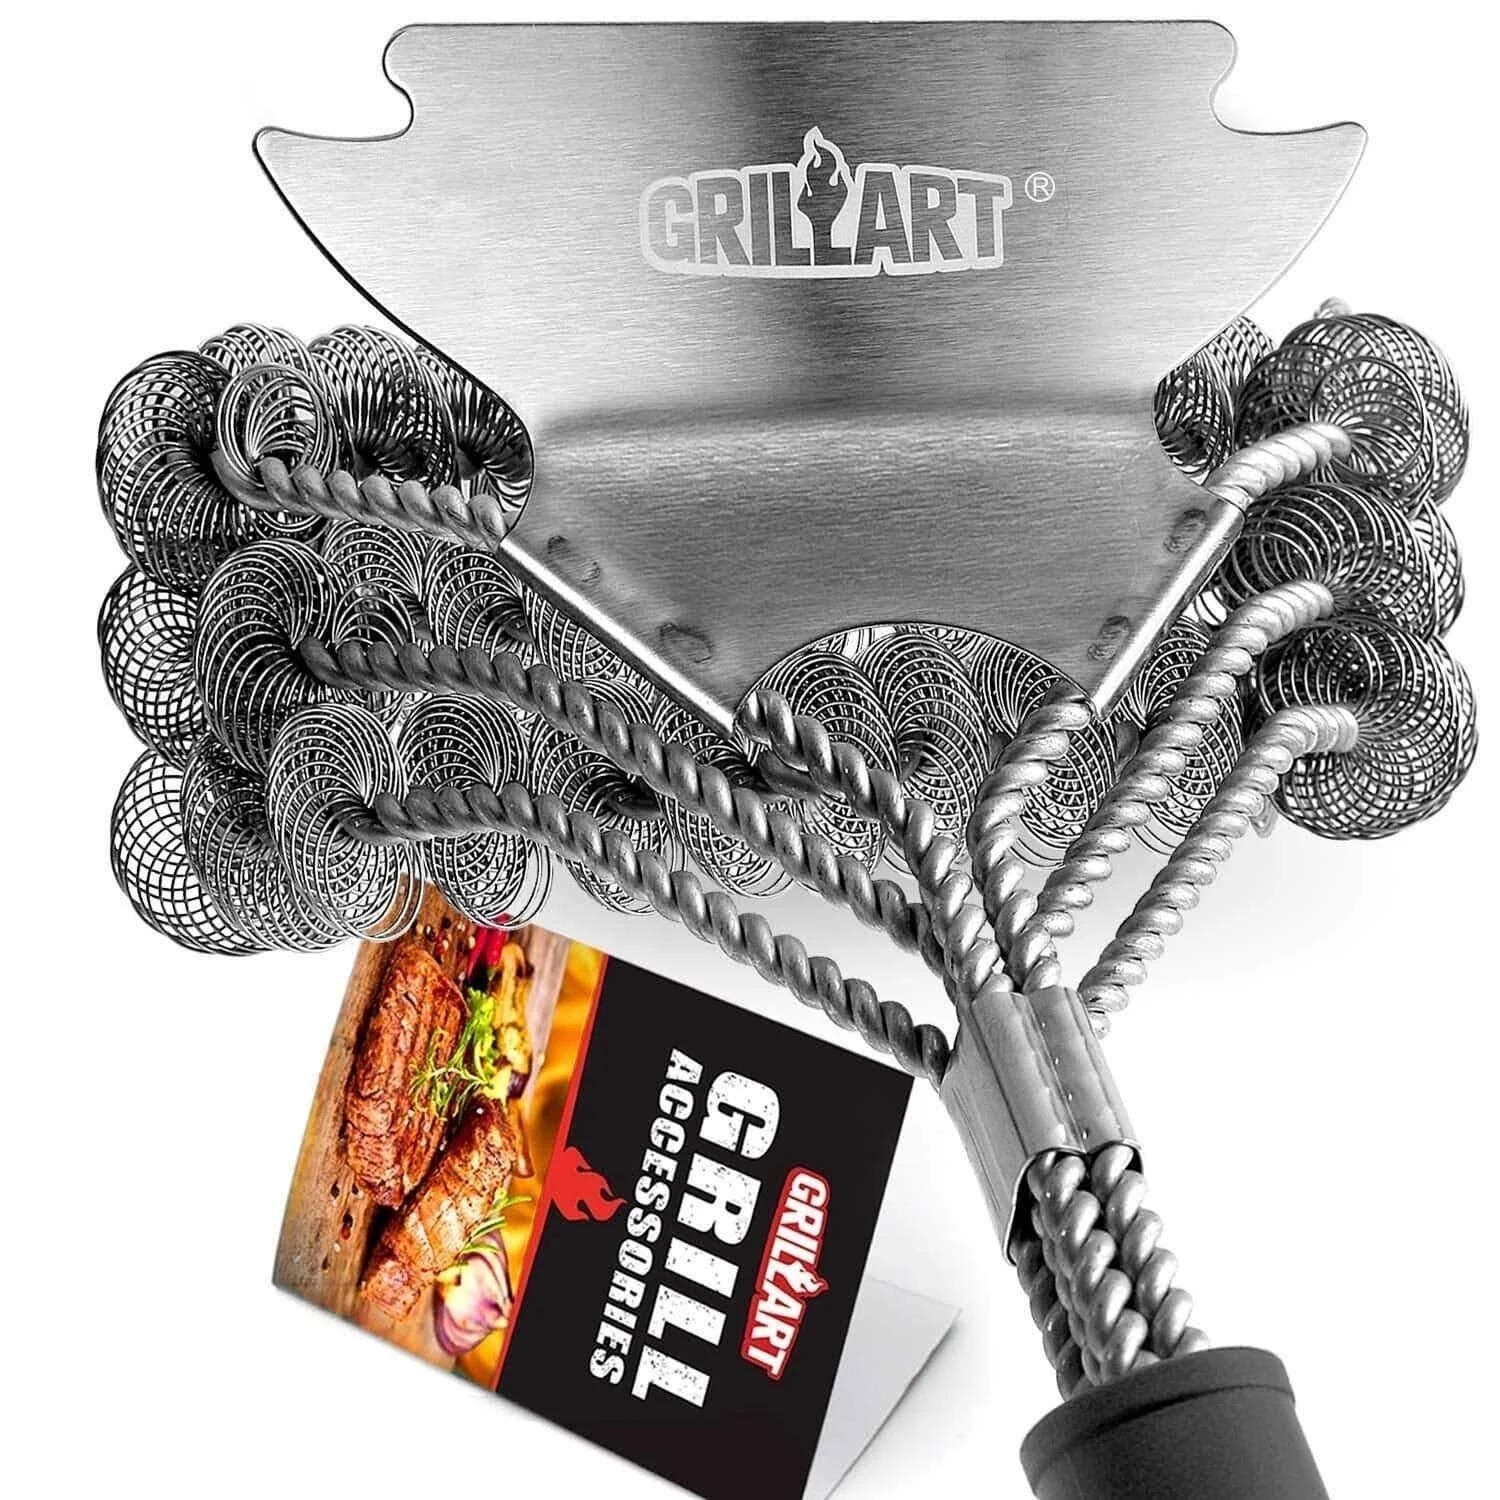 GRILLART Safe BBQ Cleaning Grill Brush and Scraper | Image